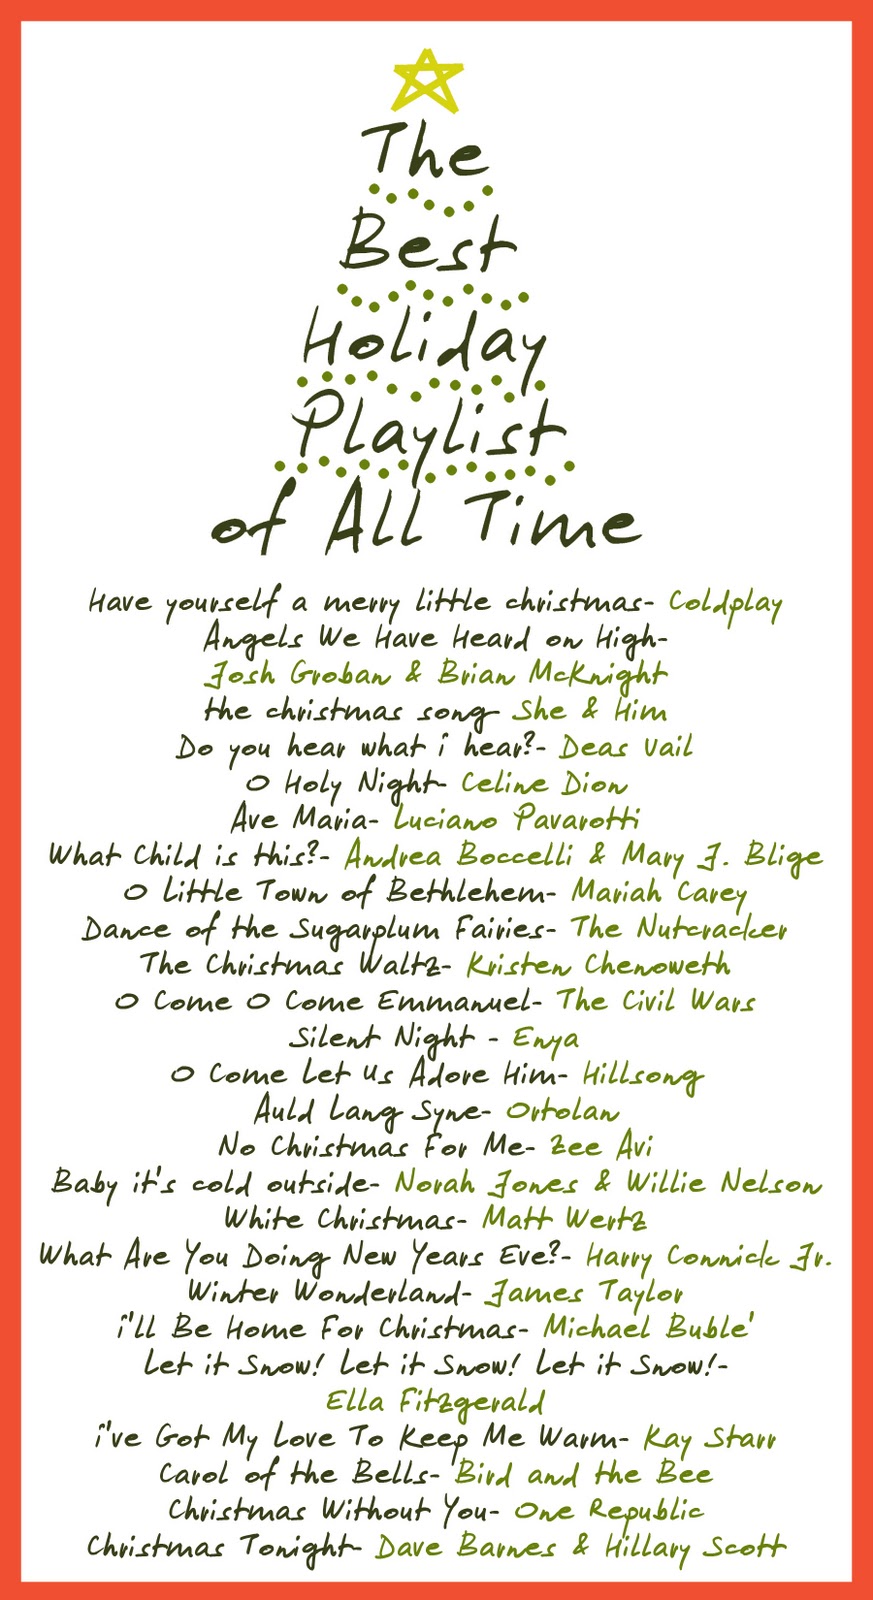 Design Muse: The Best Holiday Playlist of All Time